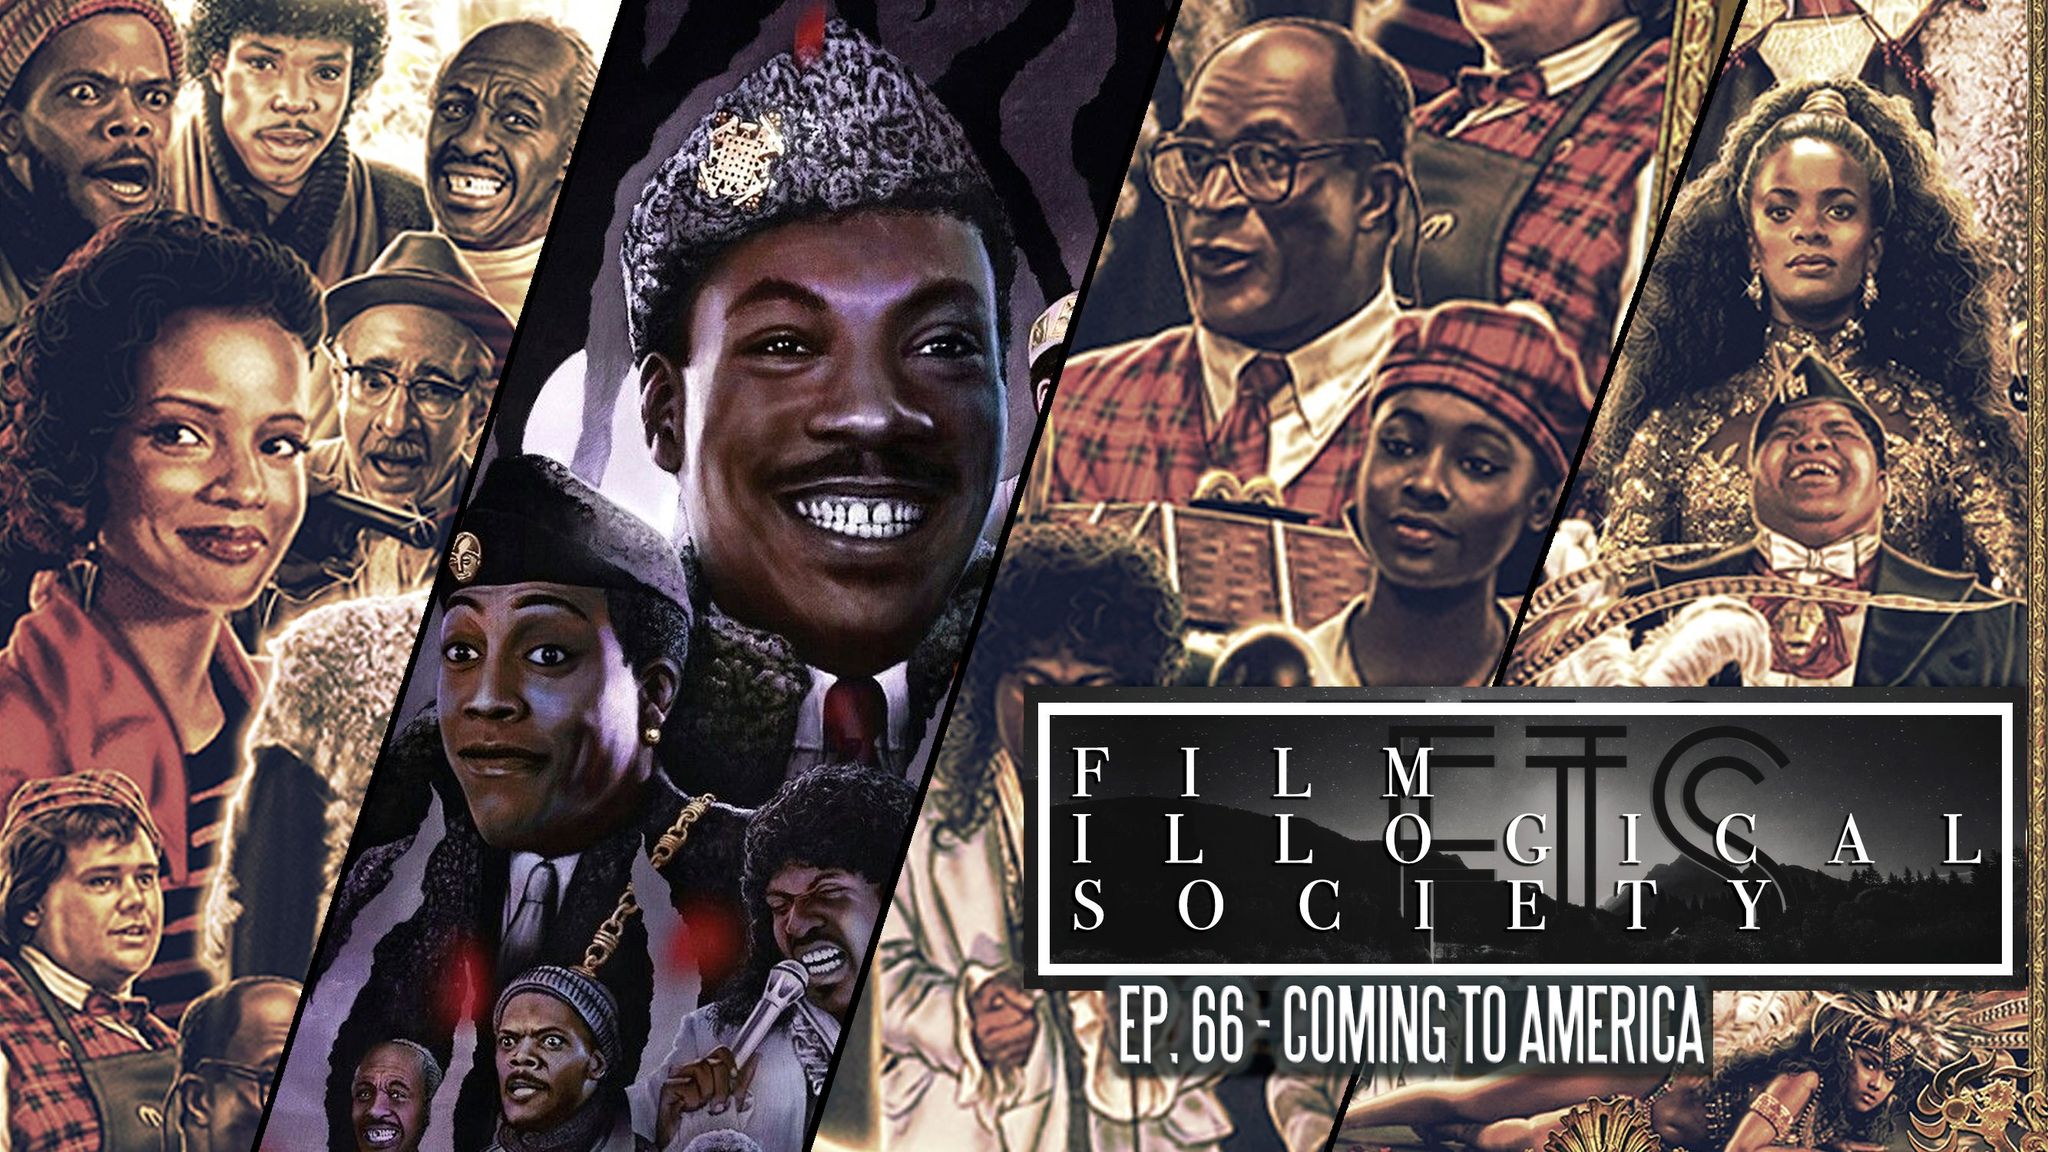 66 – Coming to America